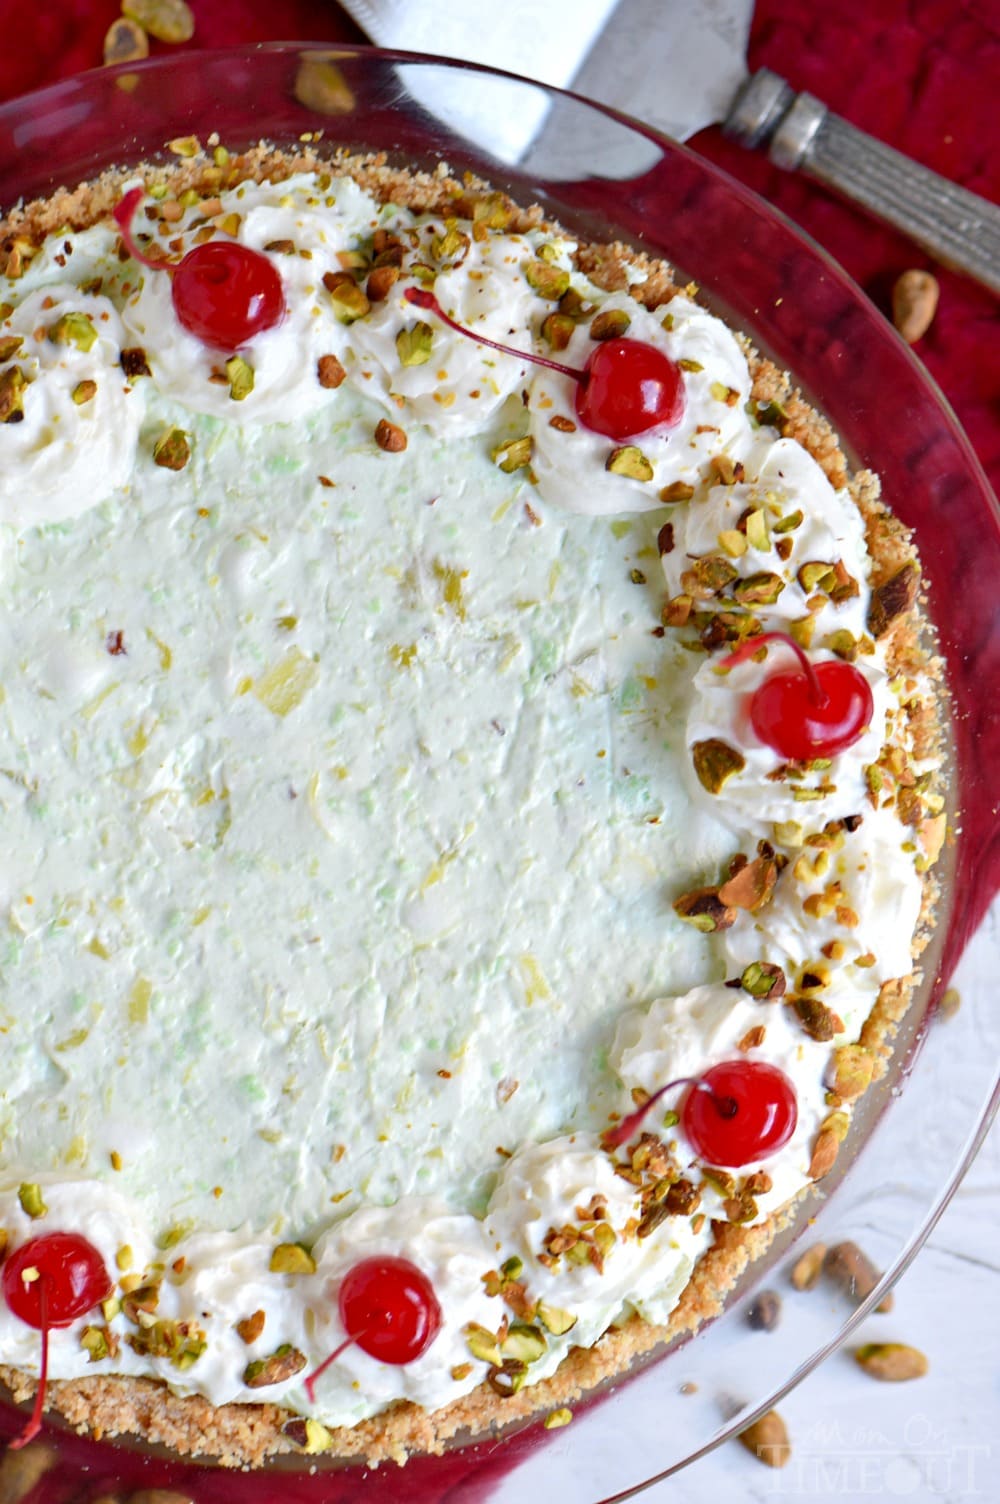 This easy Pistachio Pie recipe is a going to be hit with friends and family this holiday season! Extra creamy and completely irresisitble, this easy pie recipe takes just minutes to prepare! // Mom On Timeout